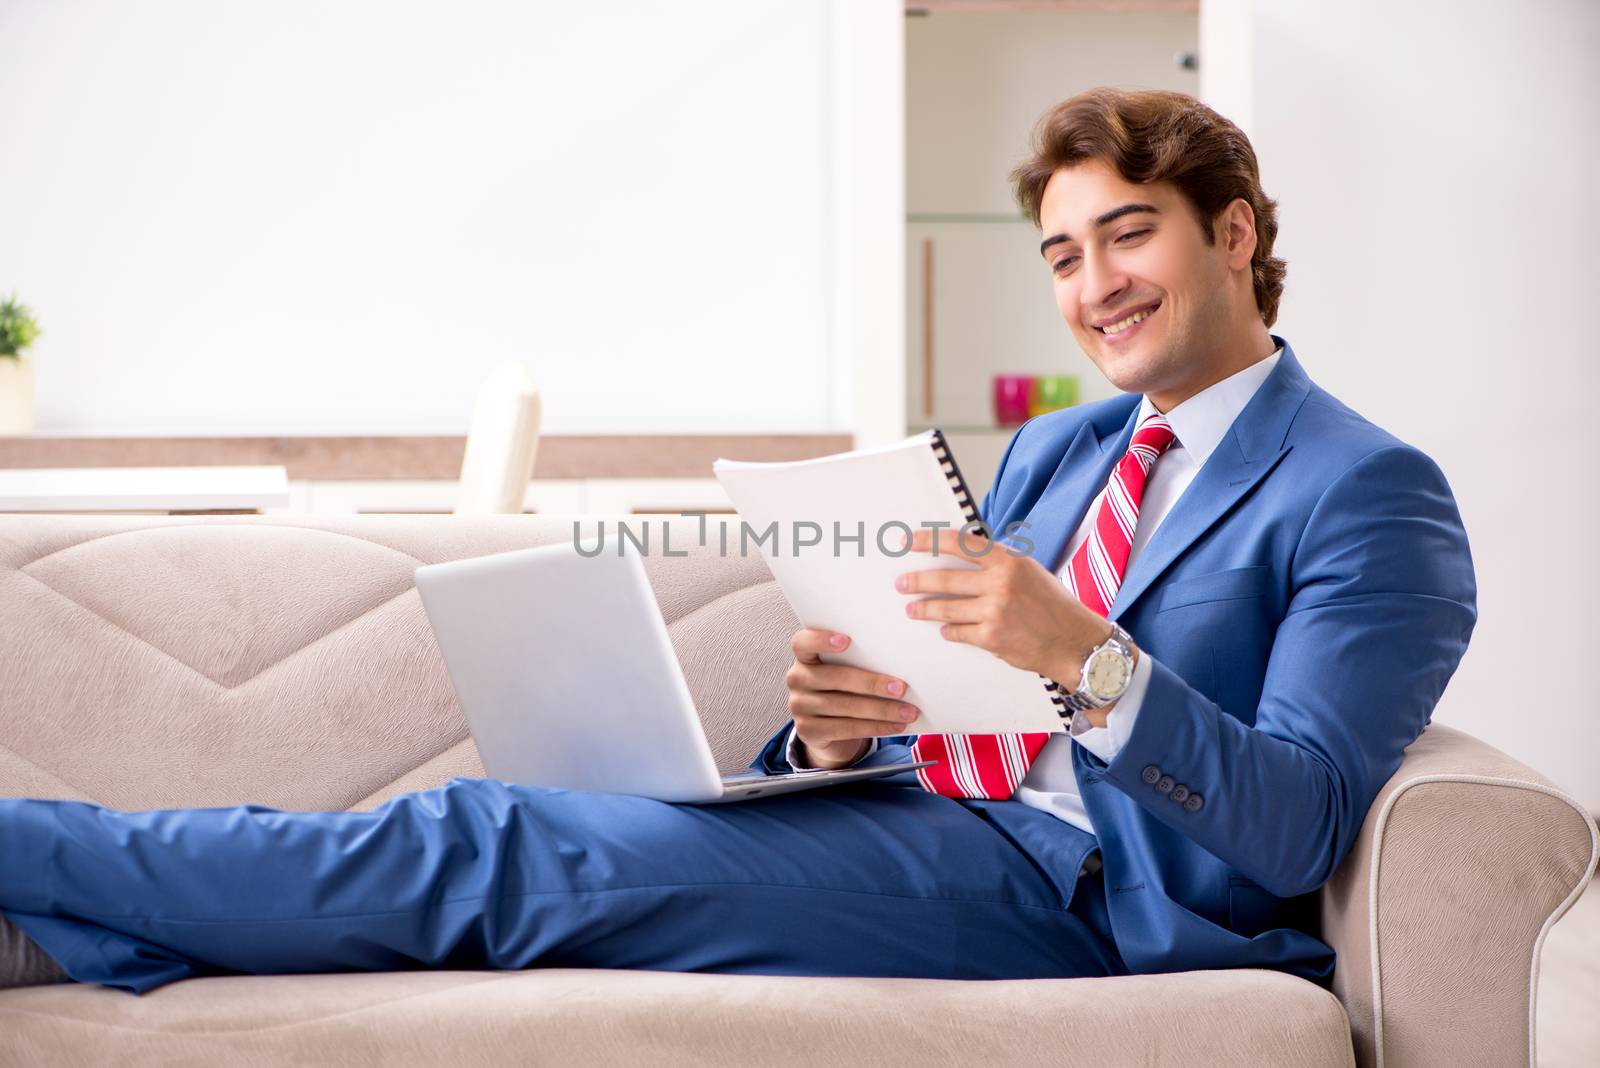 Young businessman working at home sitting on the sofa  